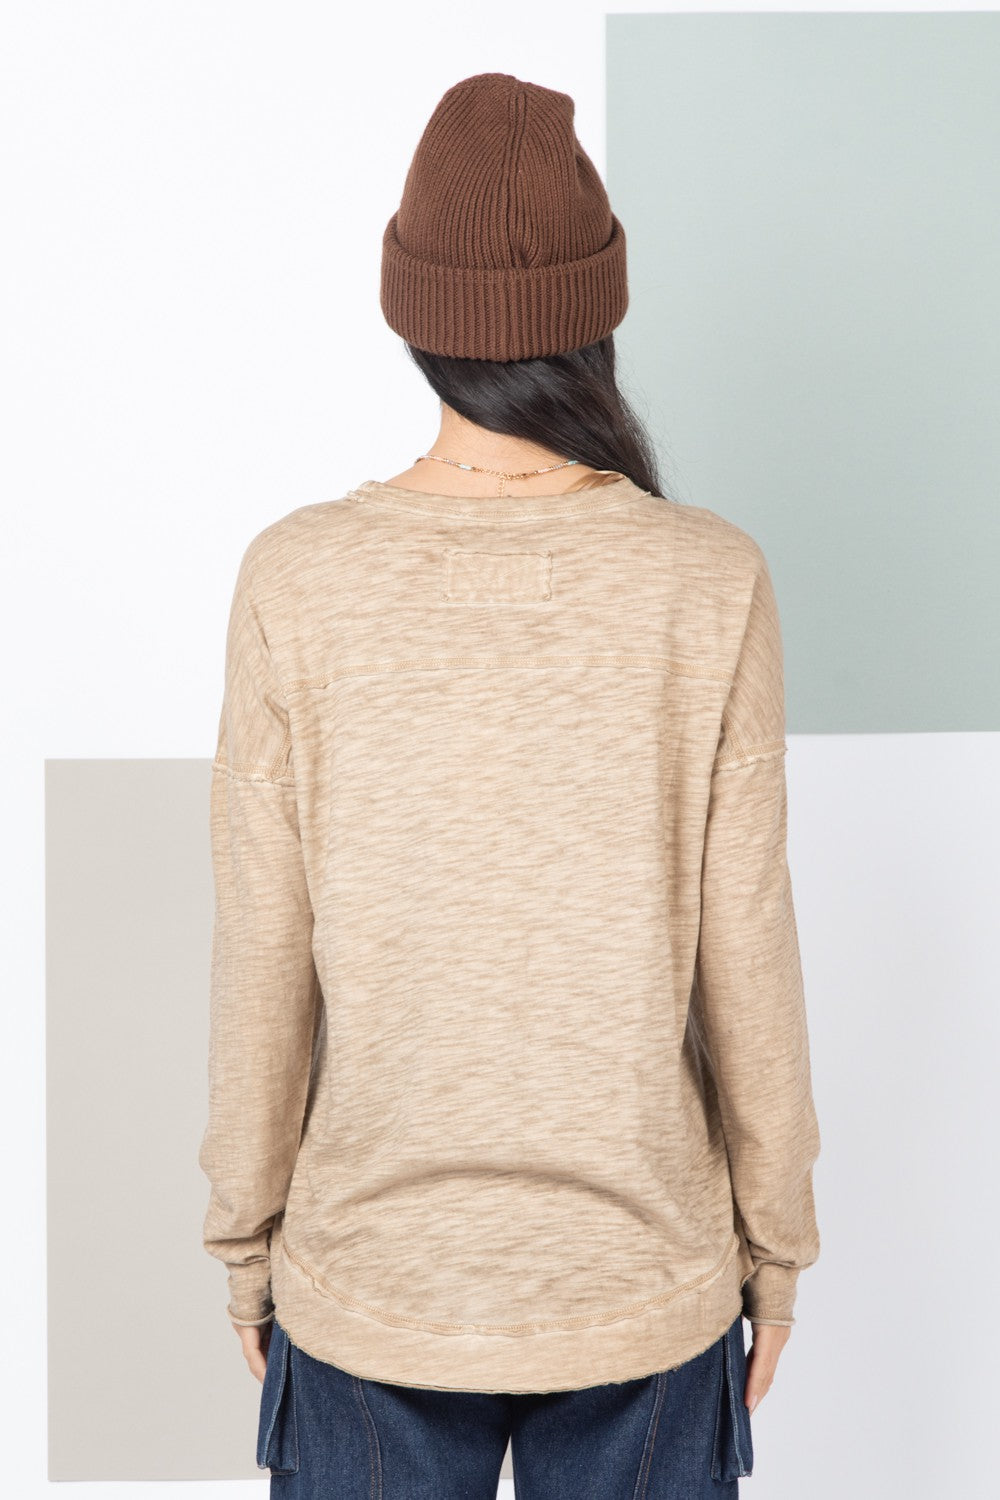 Very J Raw Edge Detail Oversized Knit Top